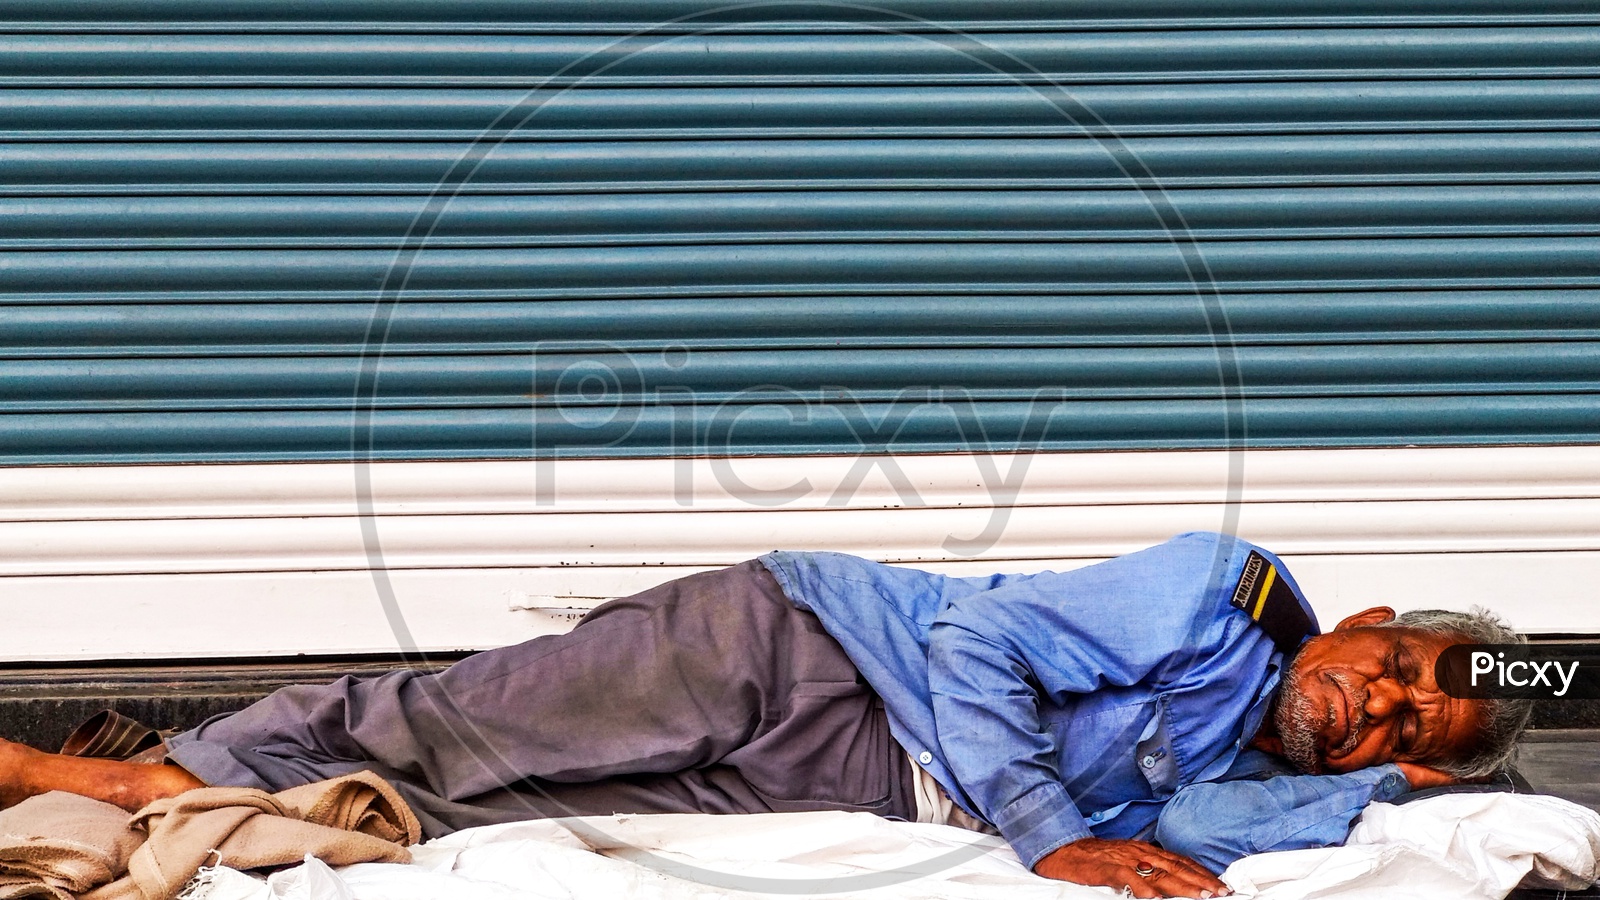 Security guard Sleeping on Streets